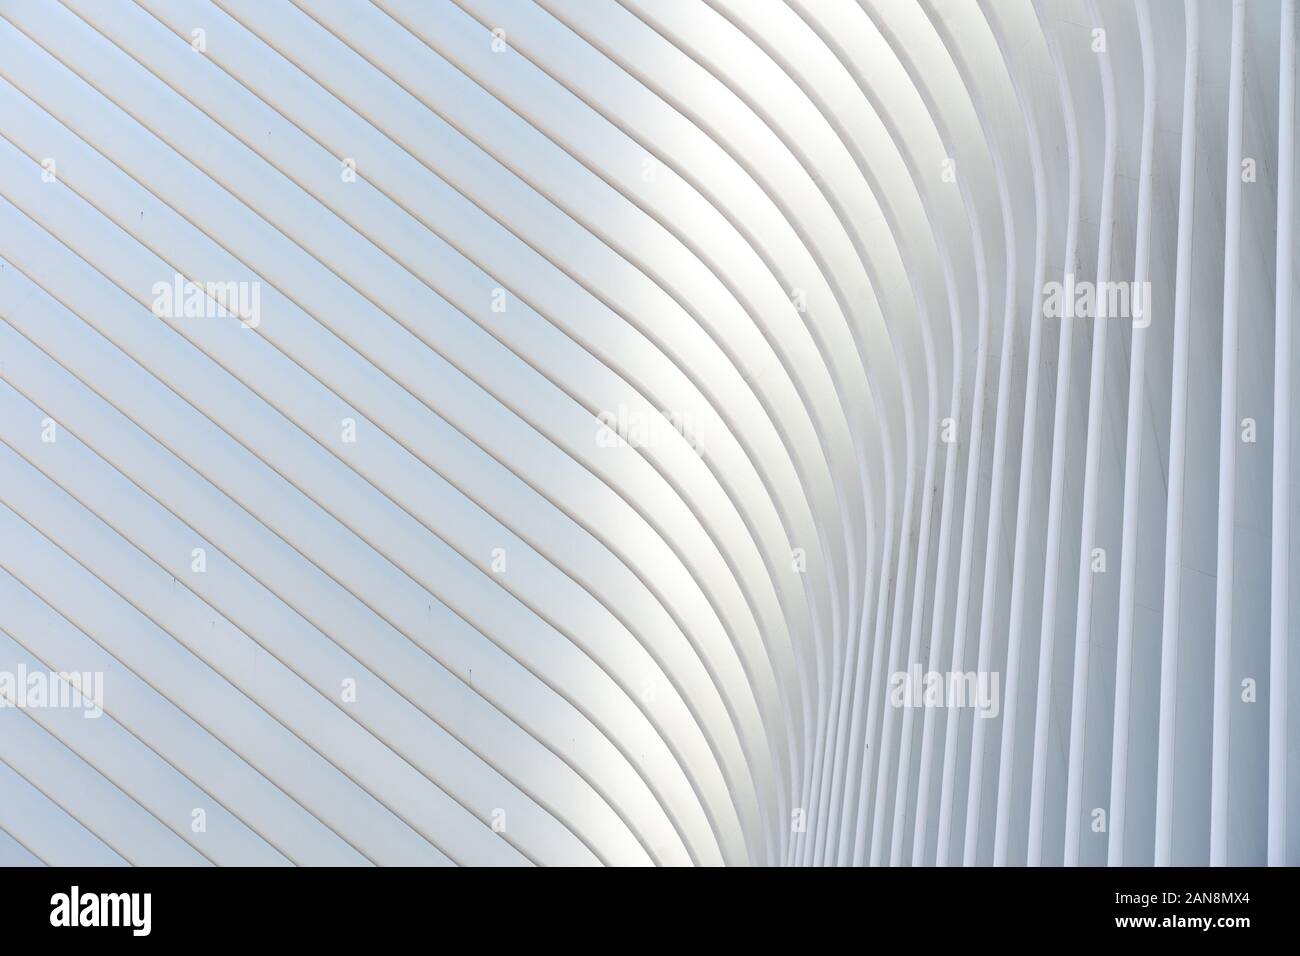 WTC Station Oculus Roof Structure Stock Photo